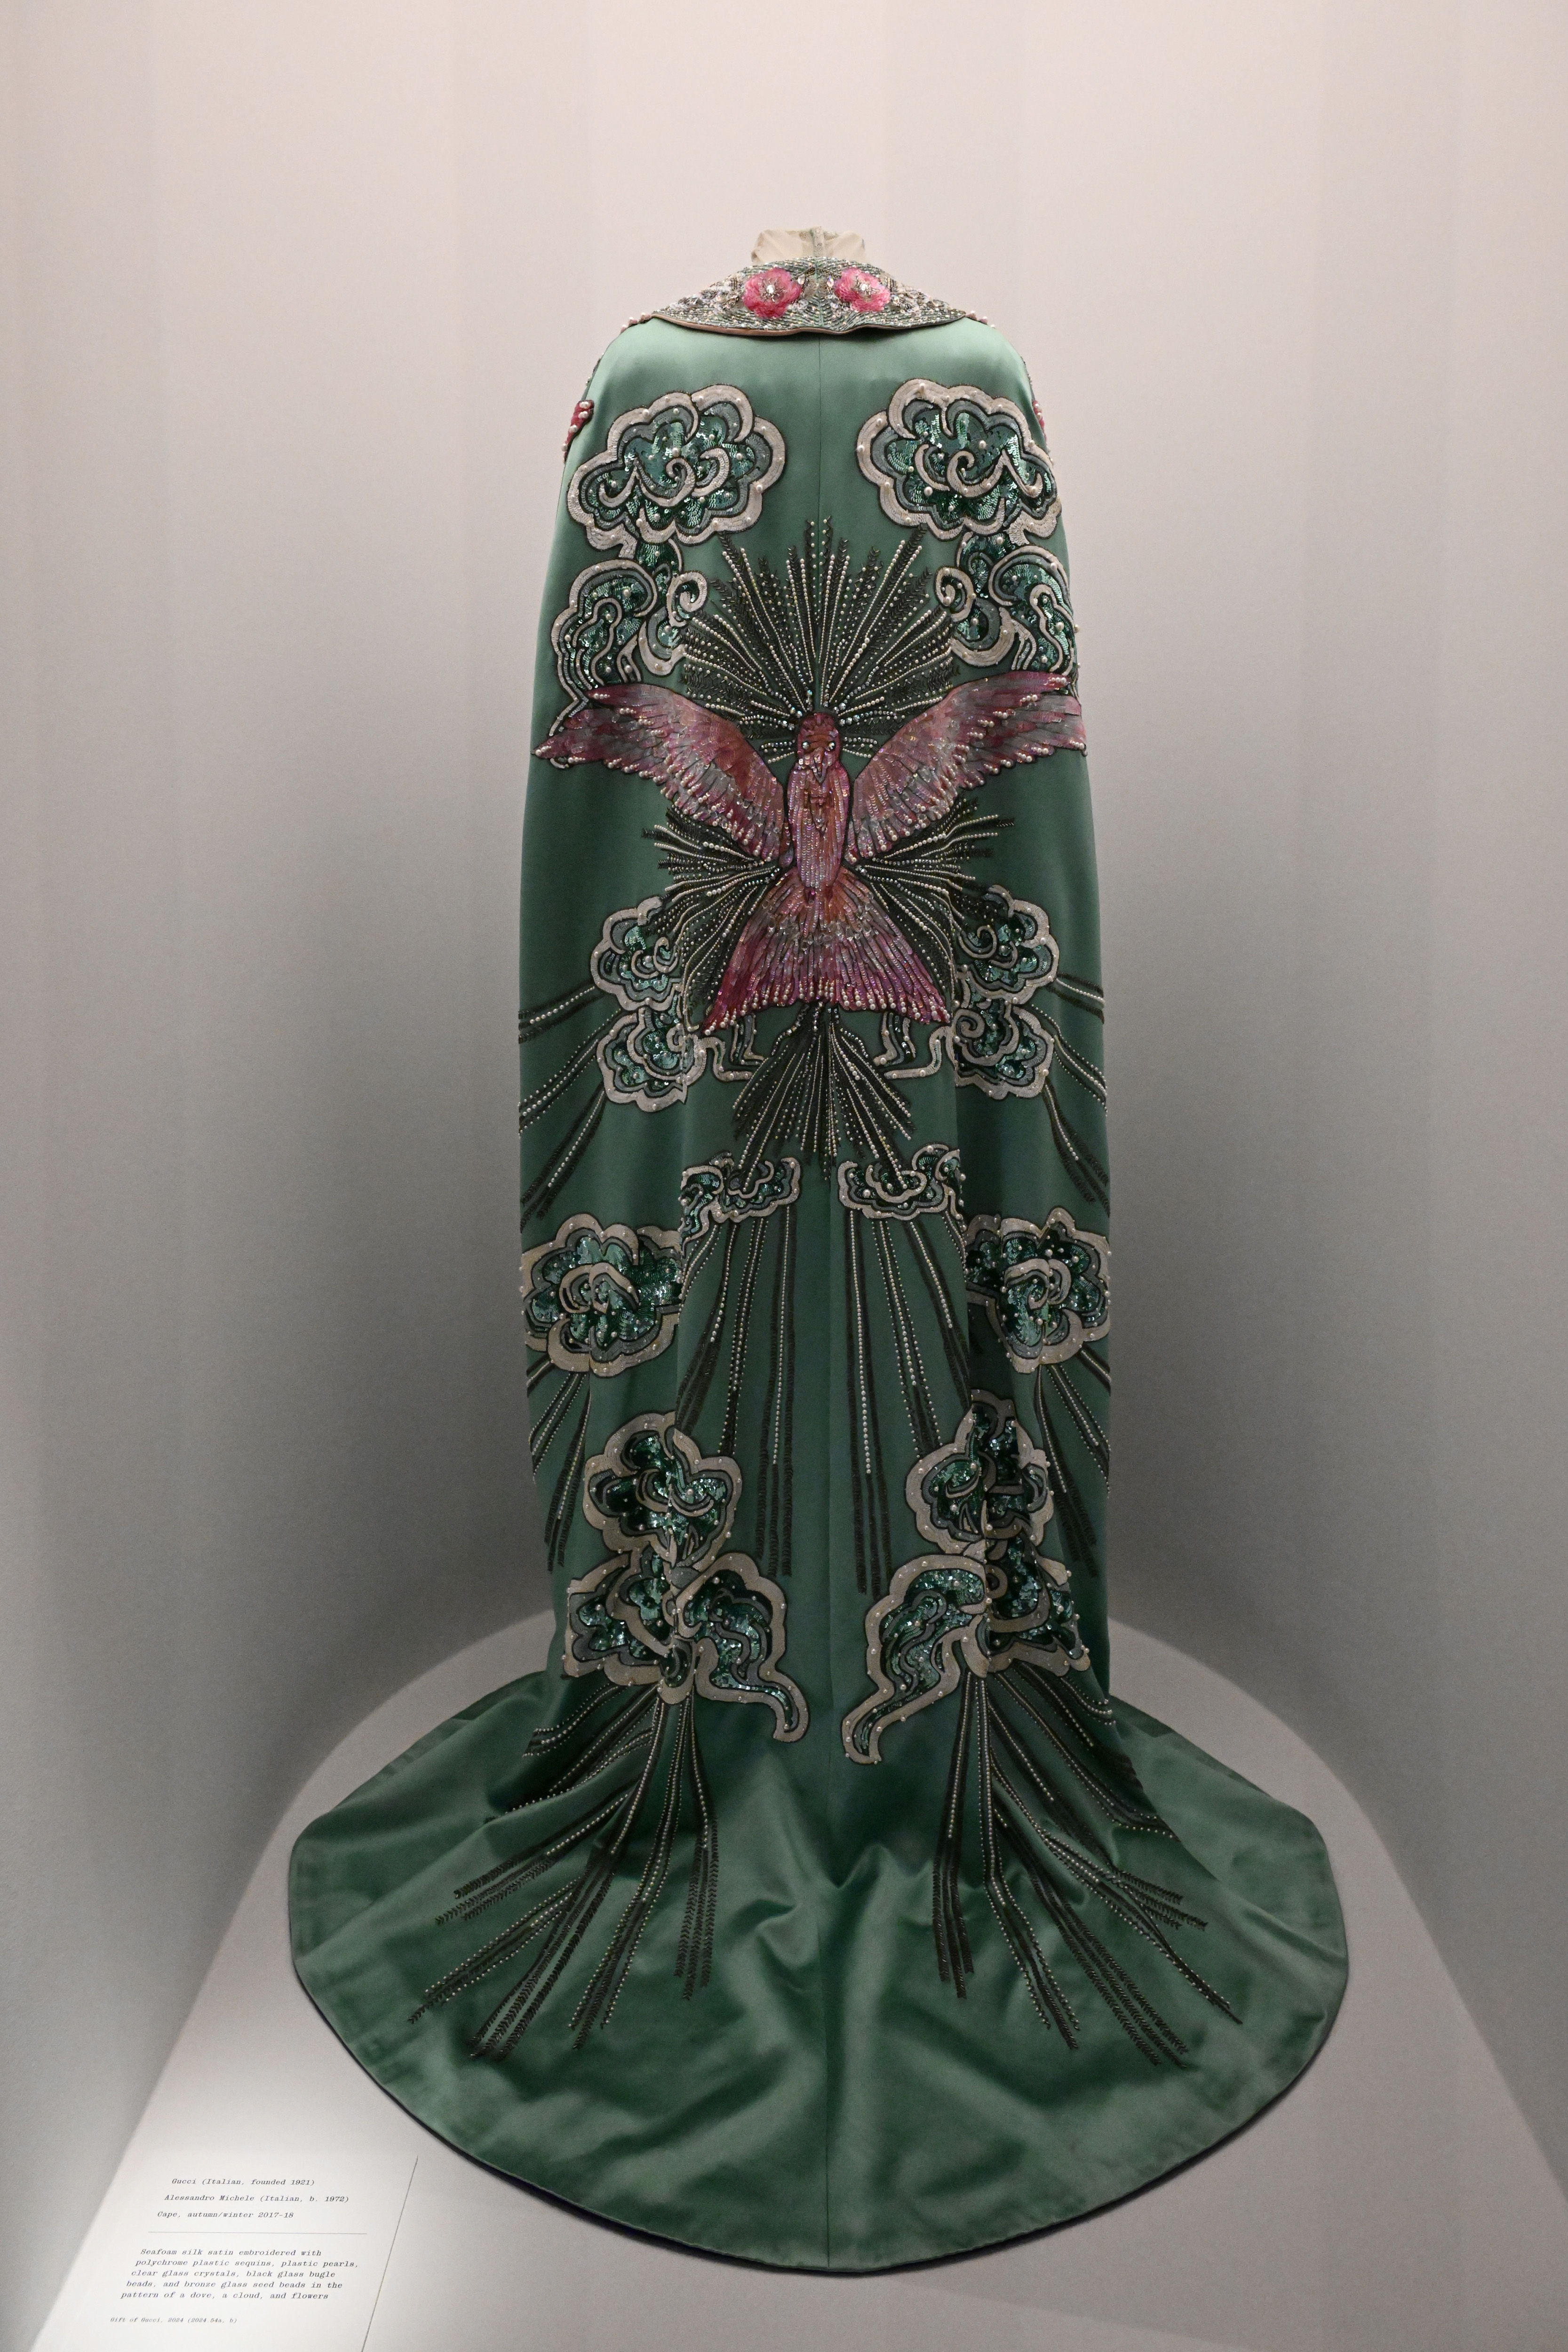 A displayed long-sleeve emerald dress with intricate bird embroidery and a trail